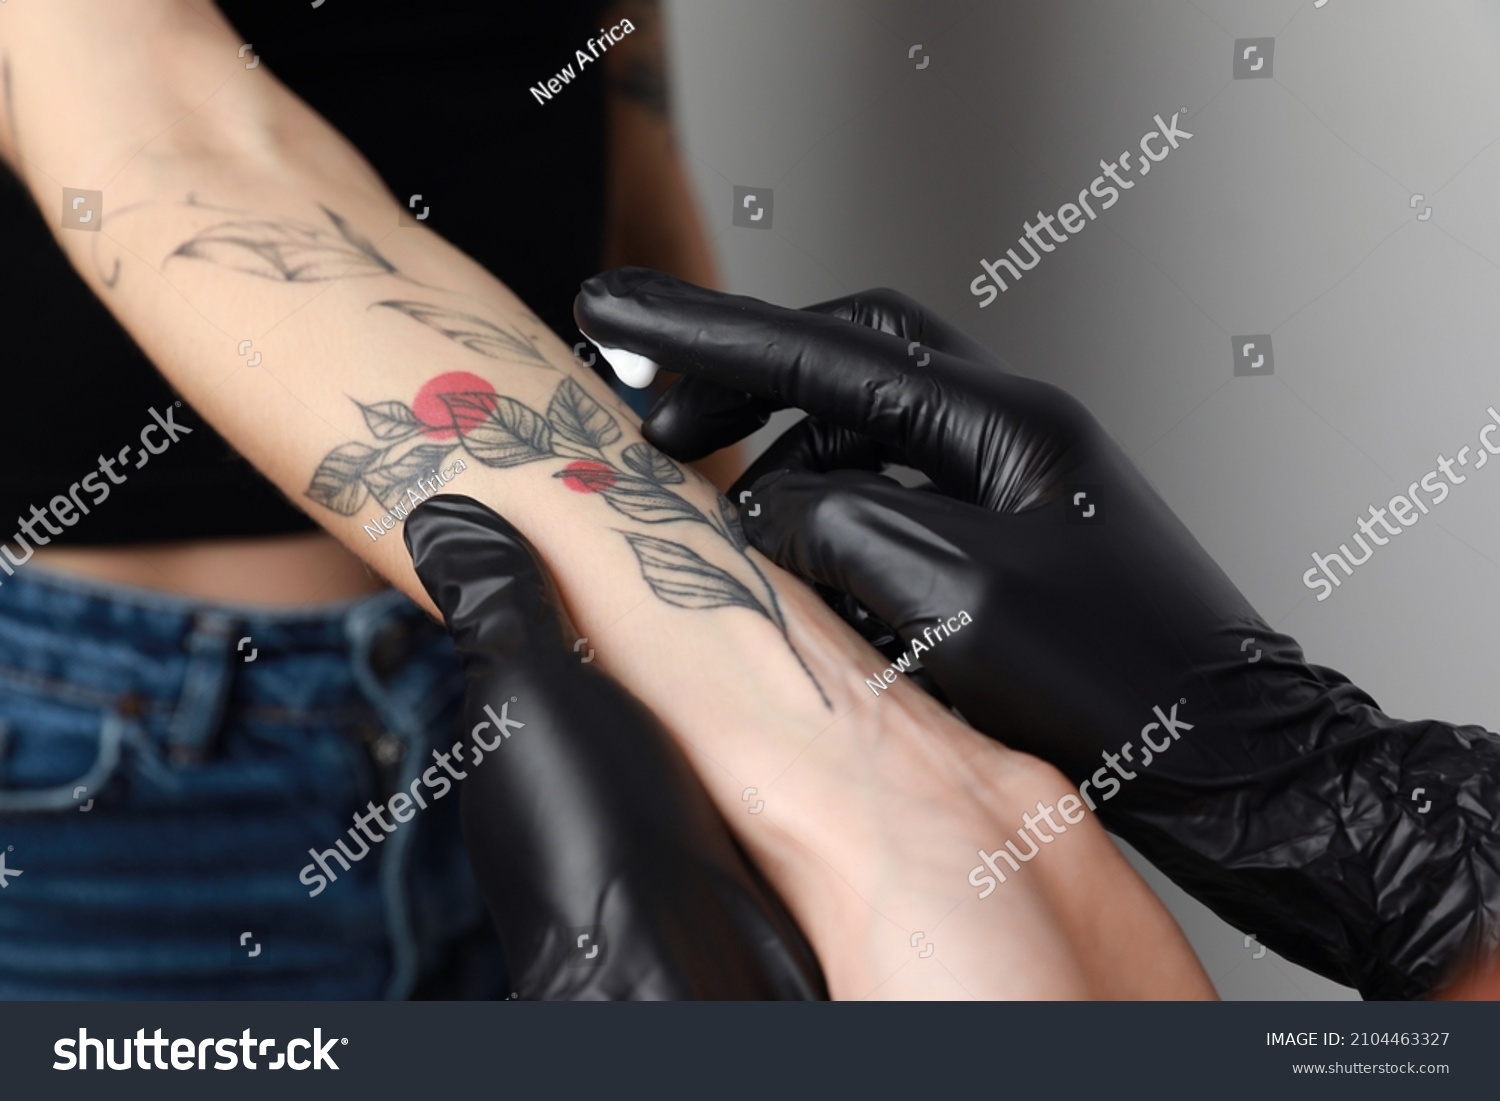 Worker in gloves applying cream on woman's arm with tattoo against light background, closeup #2104463327